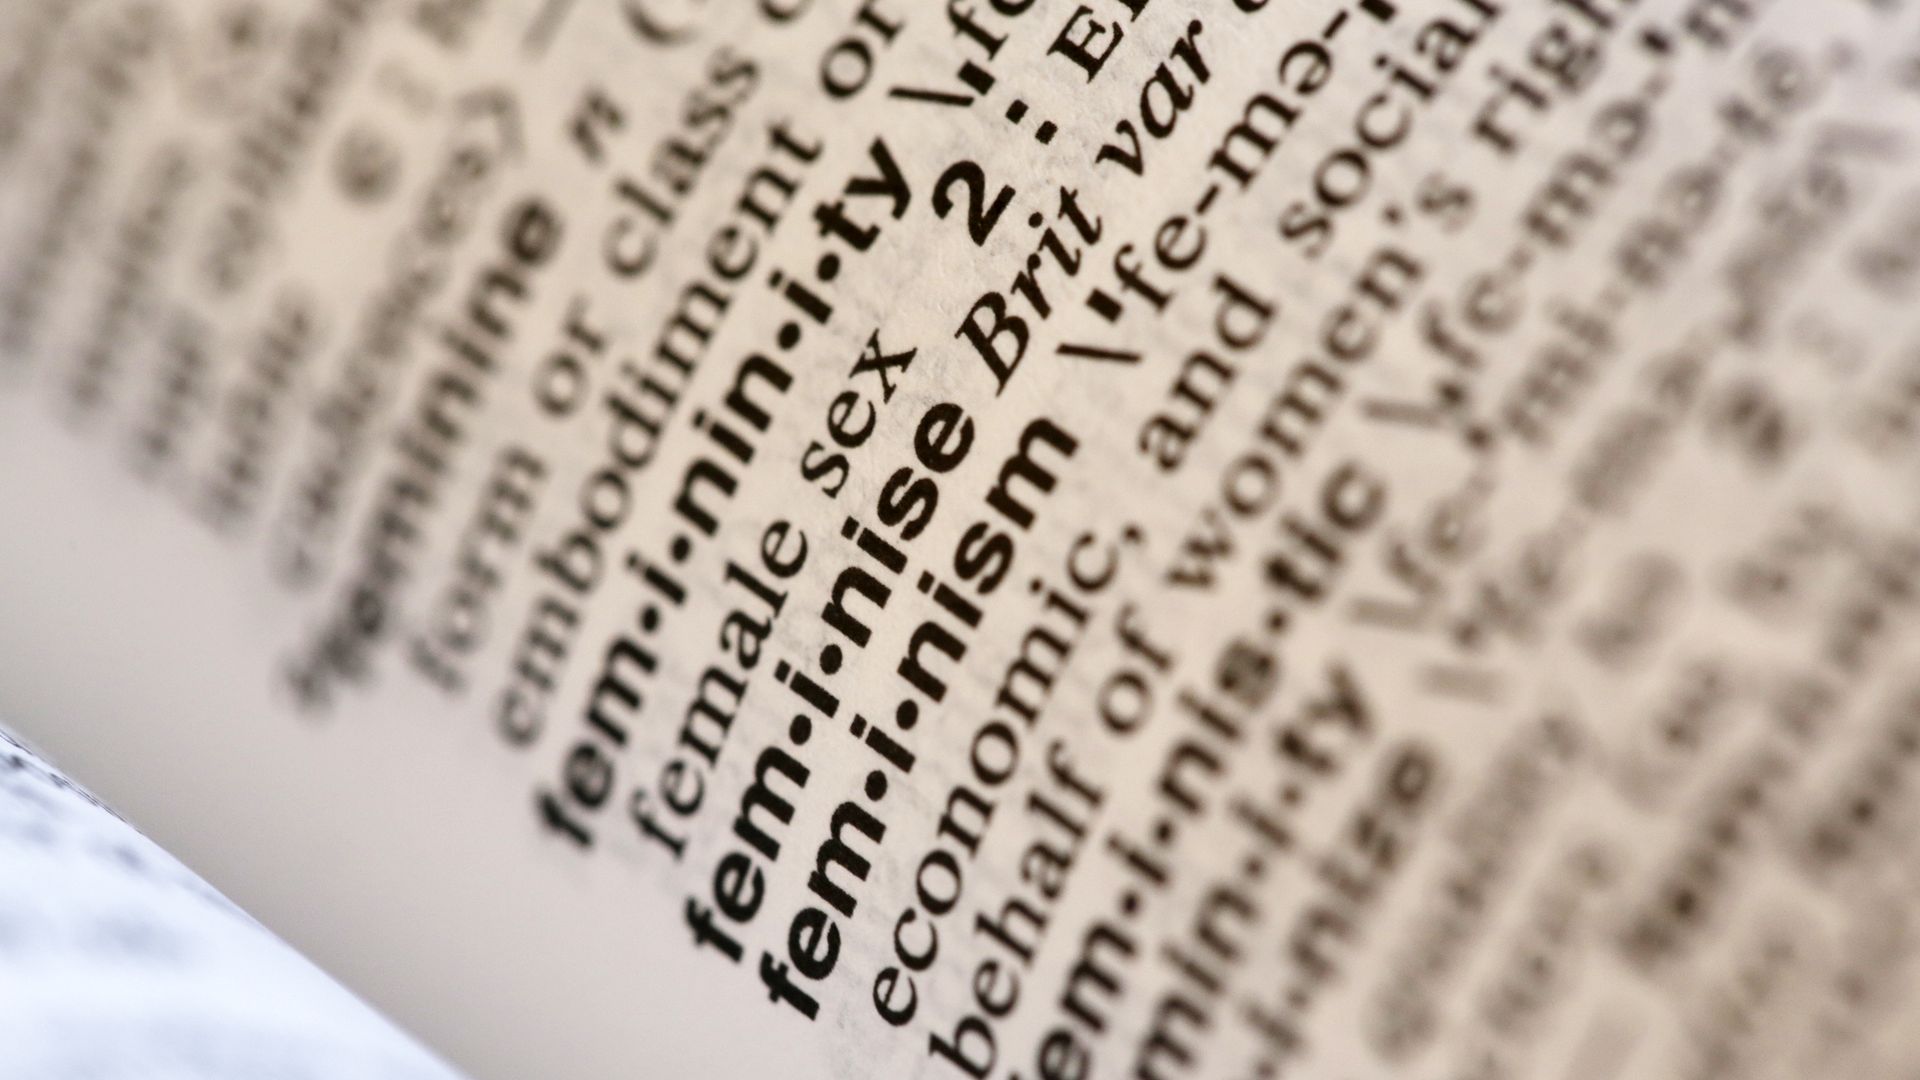 The Changing Definition of a Dictionary: Merriam-Webster Charts a